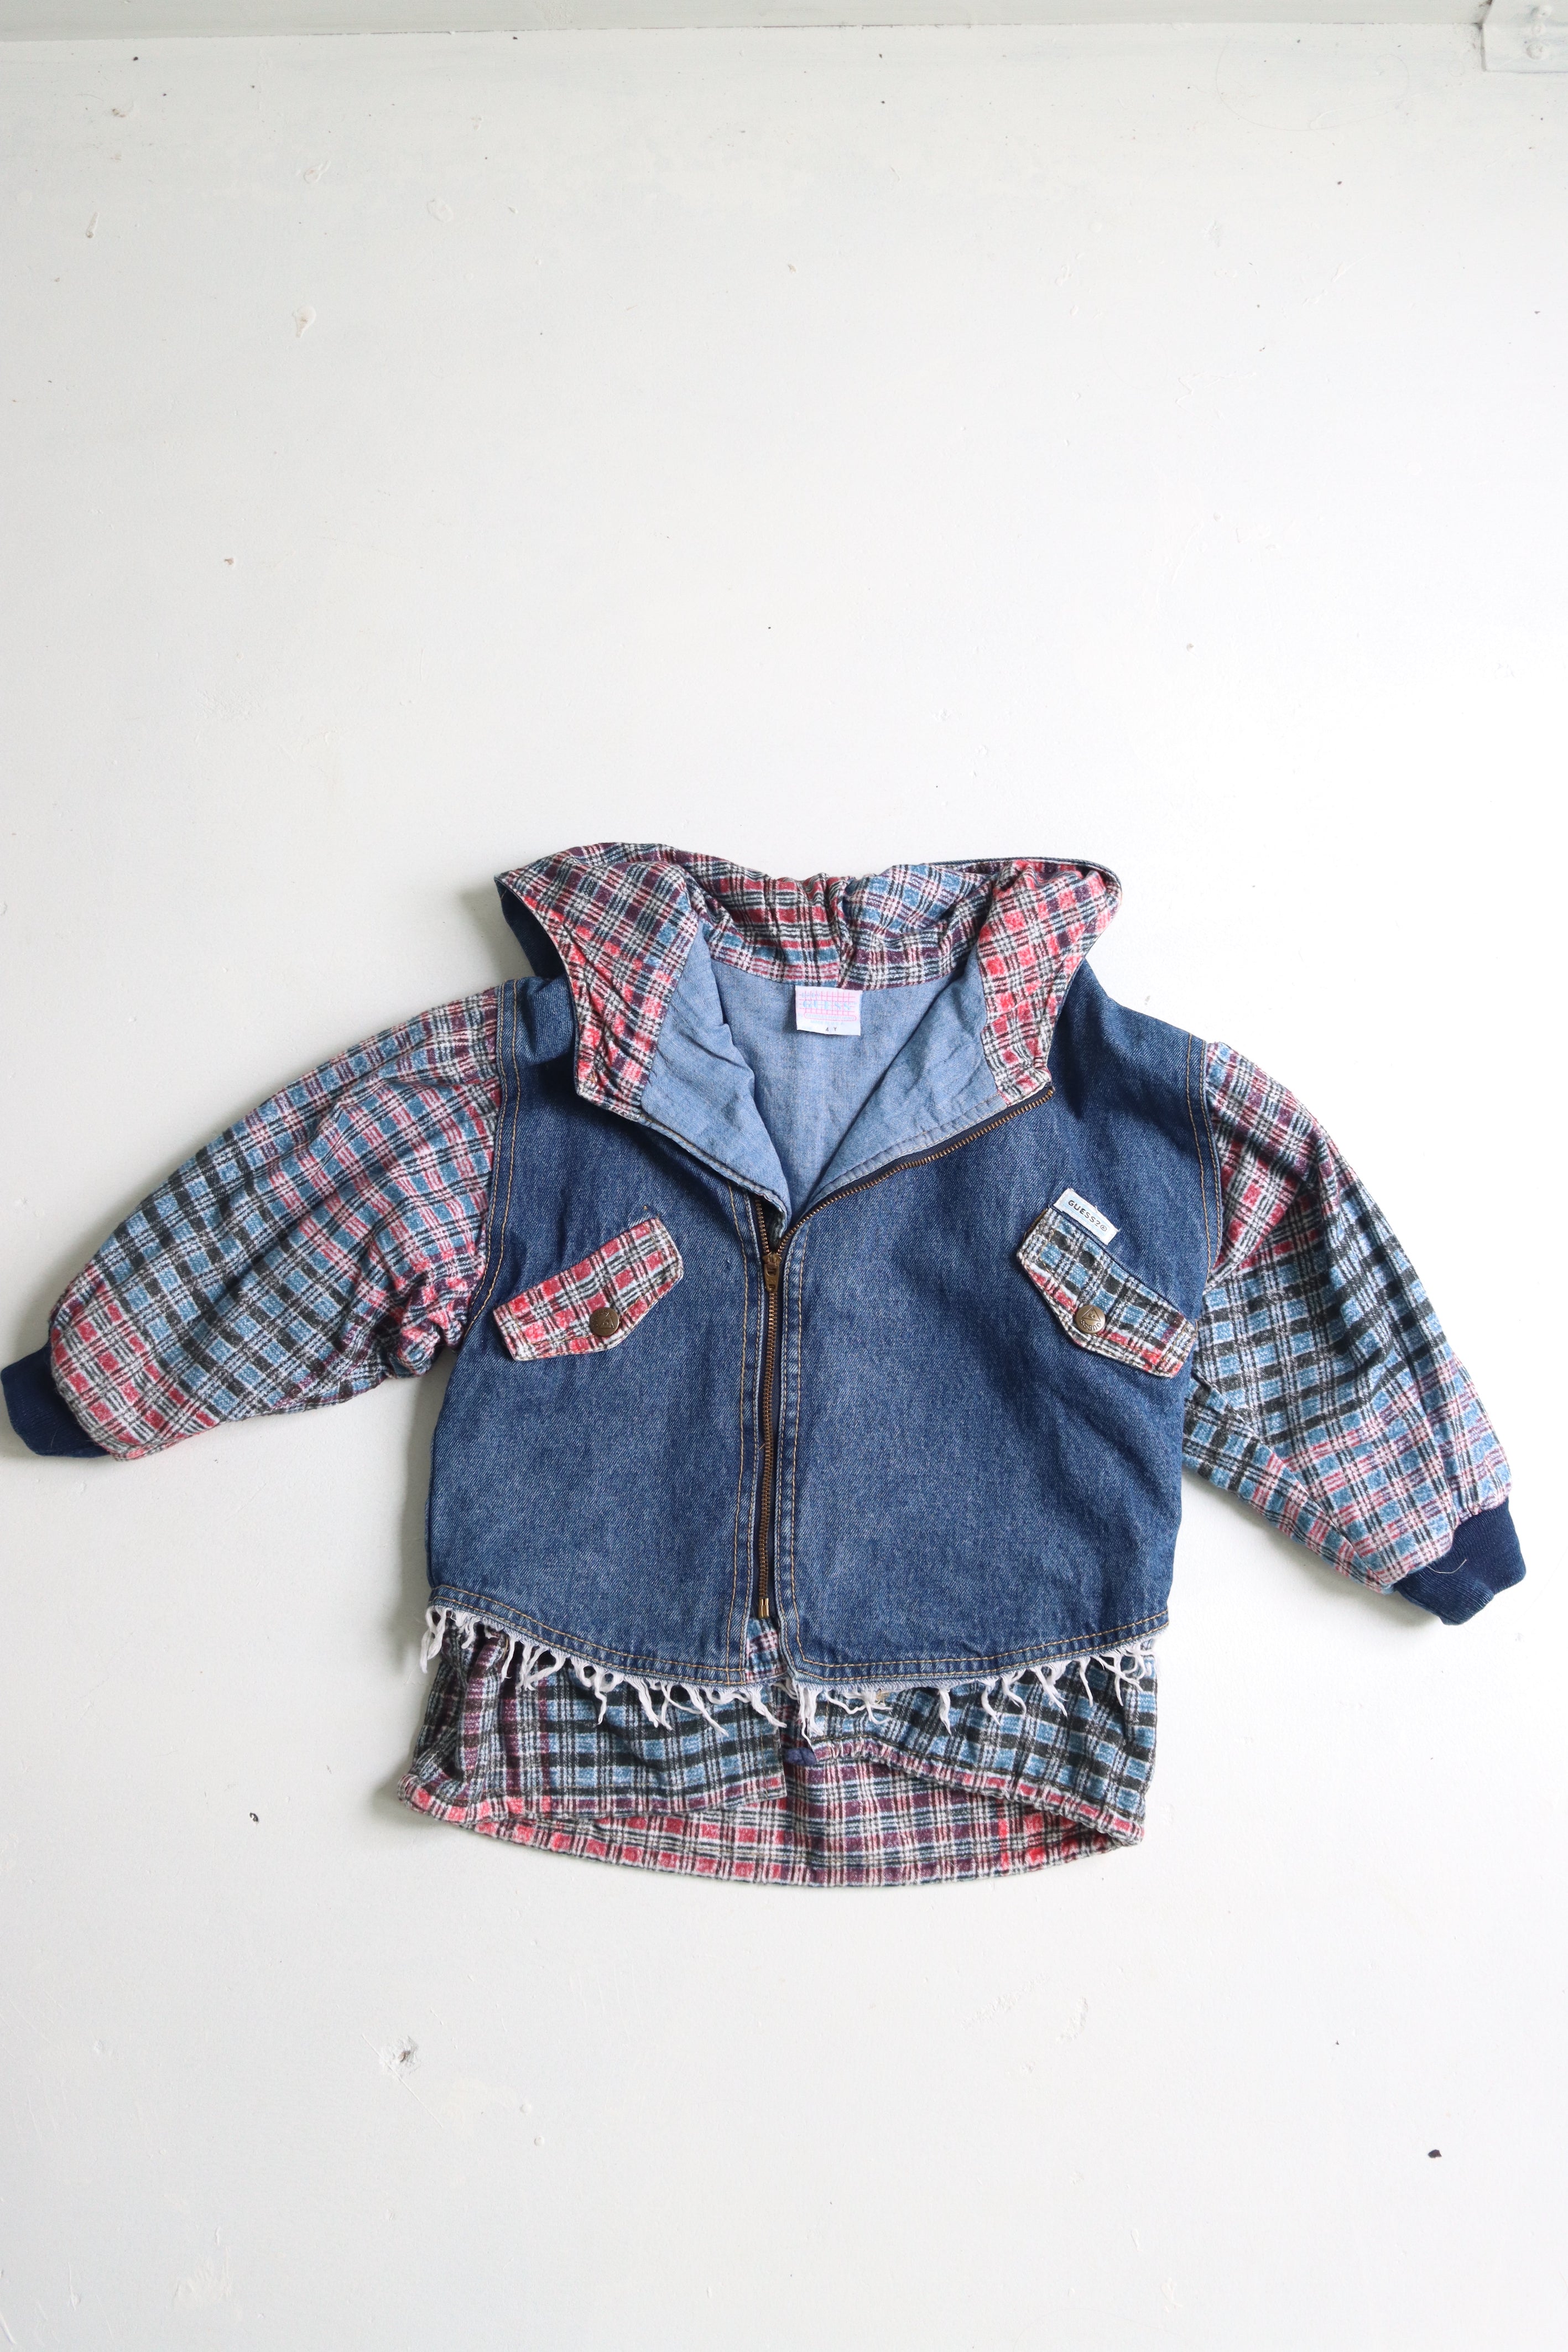 Vintage denim patchwork Guess jacket - Size 4 years - made in USA